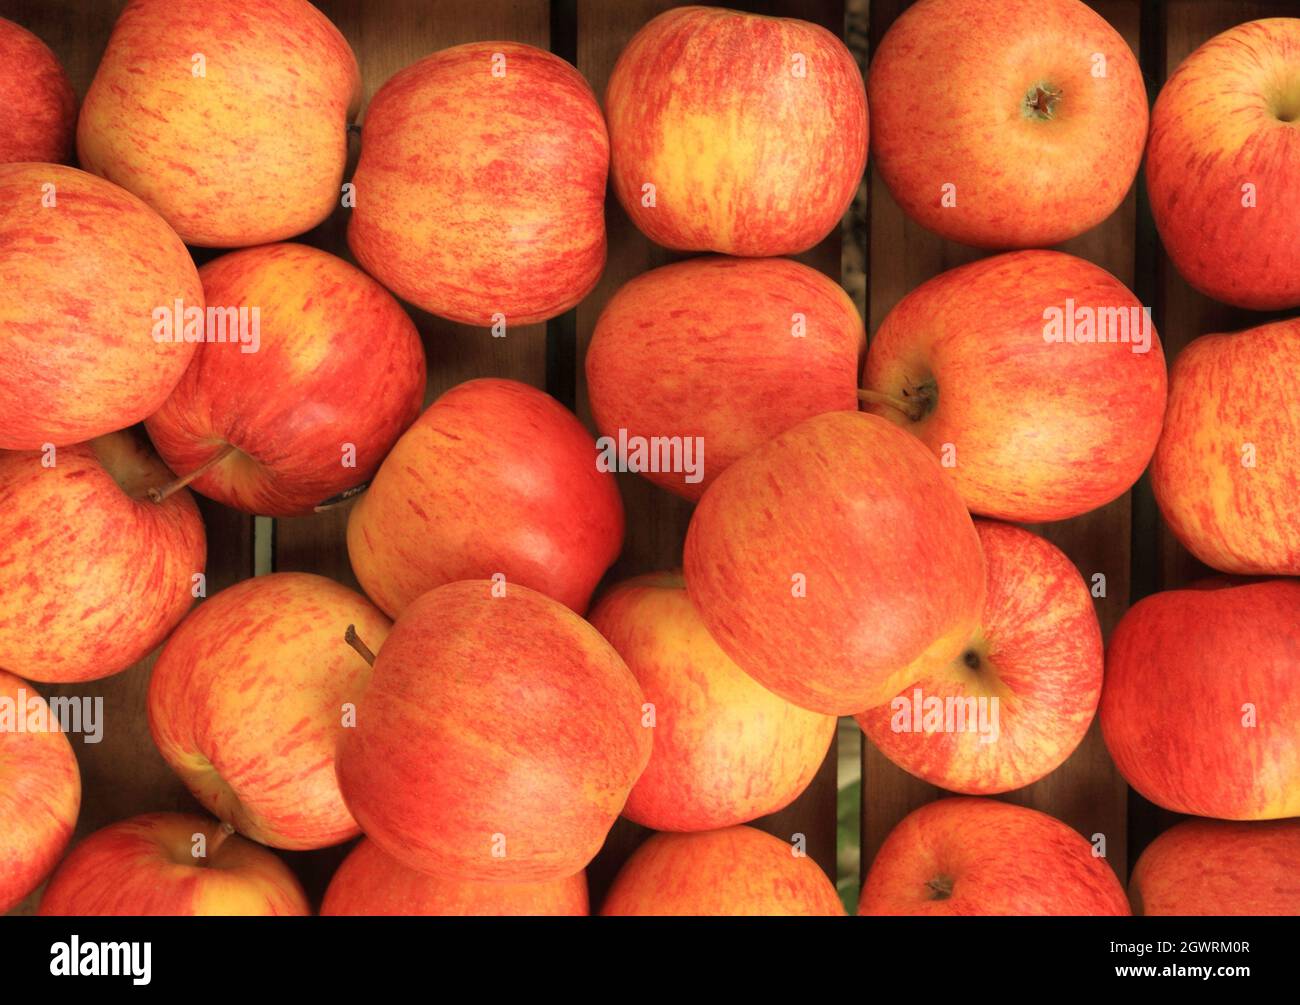 Apple 'Gala', from Chile, apples, variety, fruit, farm shop display, healthy eating Stock Photo